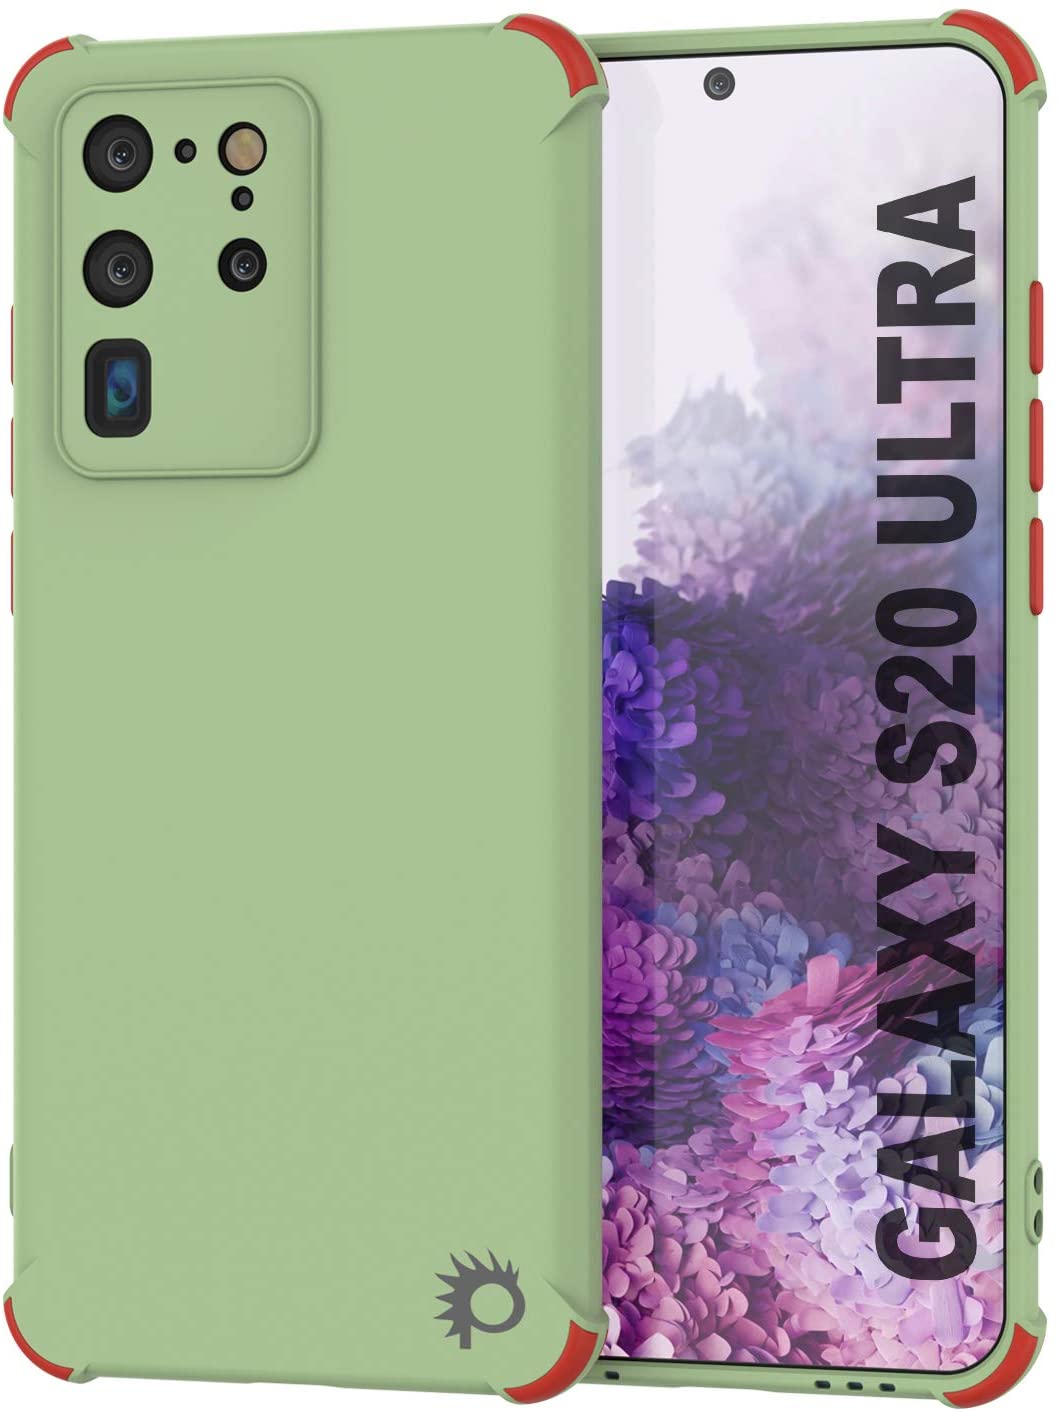 Punkcase Protective & Lightweight TPU Case [Sunshine Series] for Galaxy S20 Ultra [Light Green]